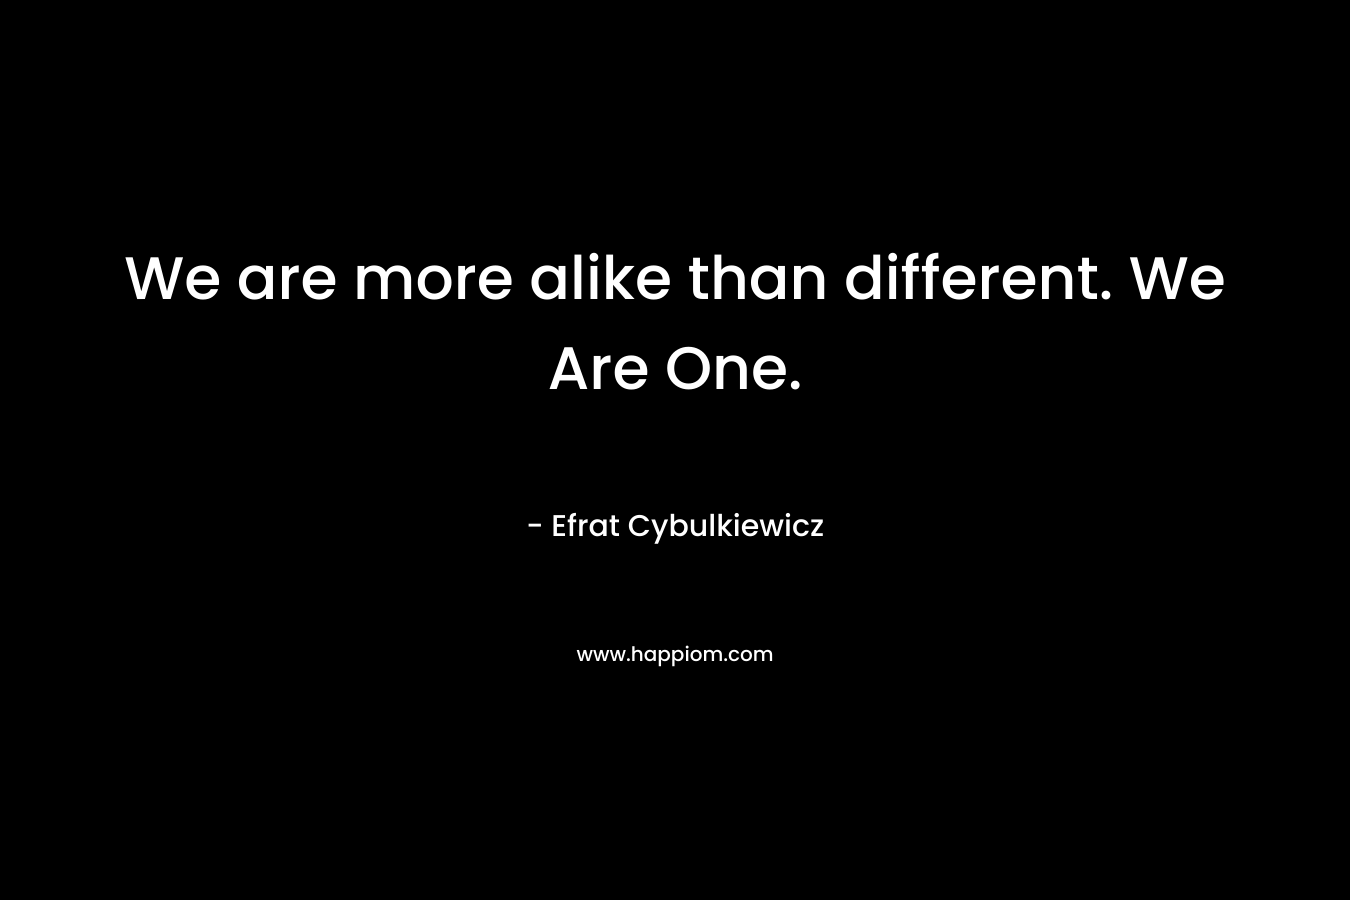 We are more alike than different. We Are One.